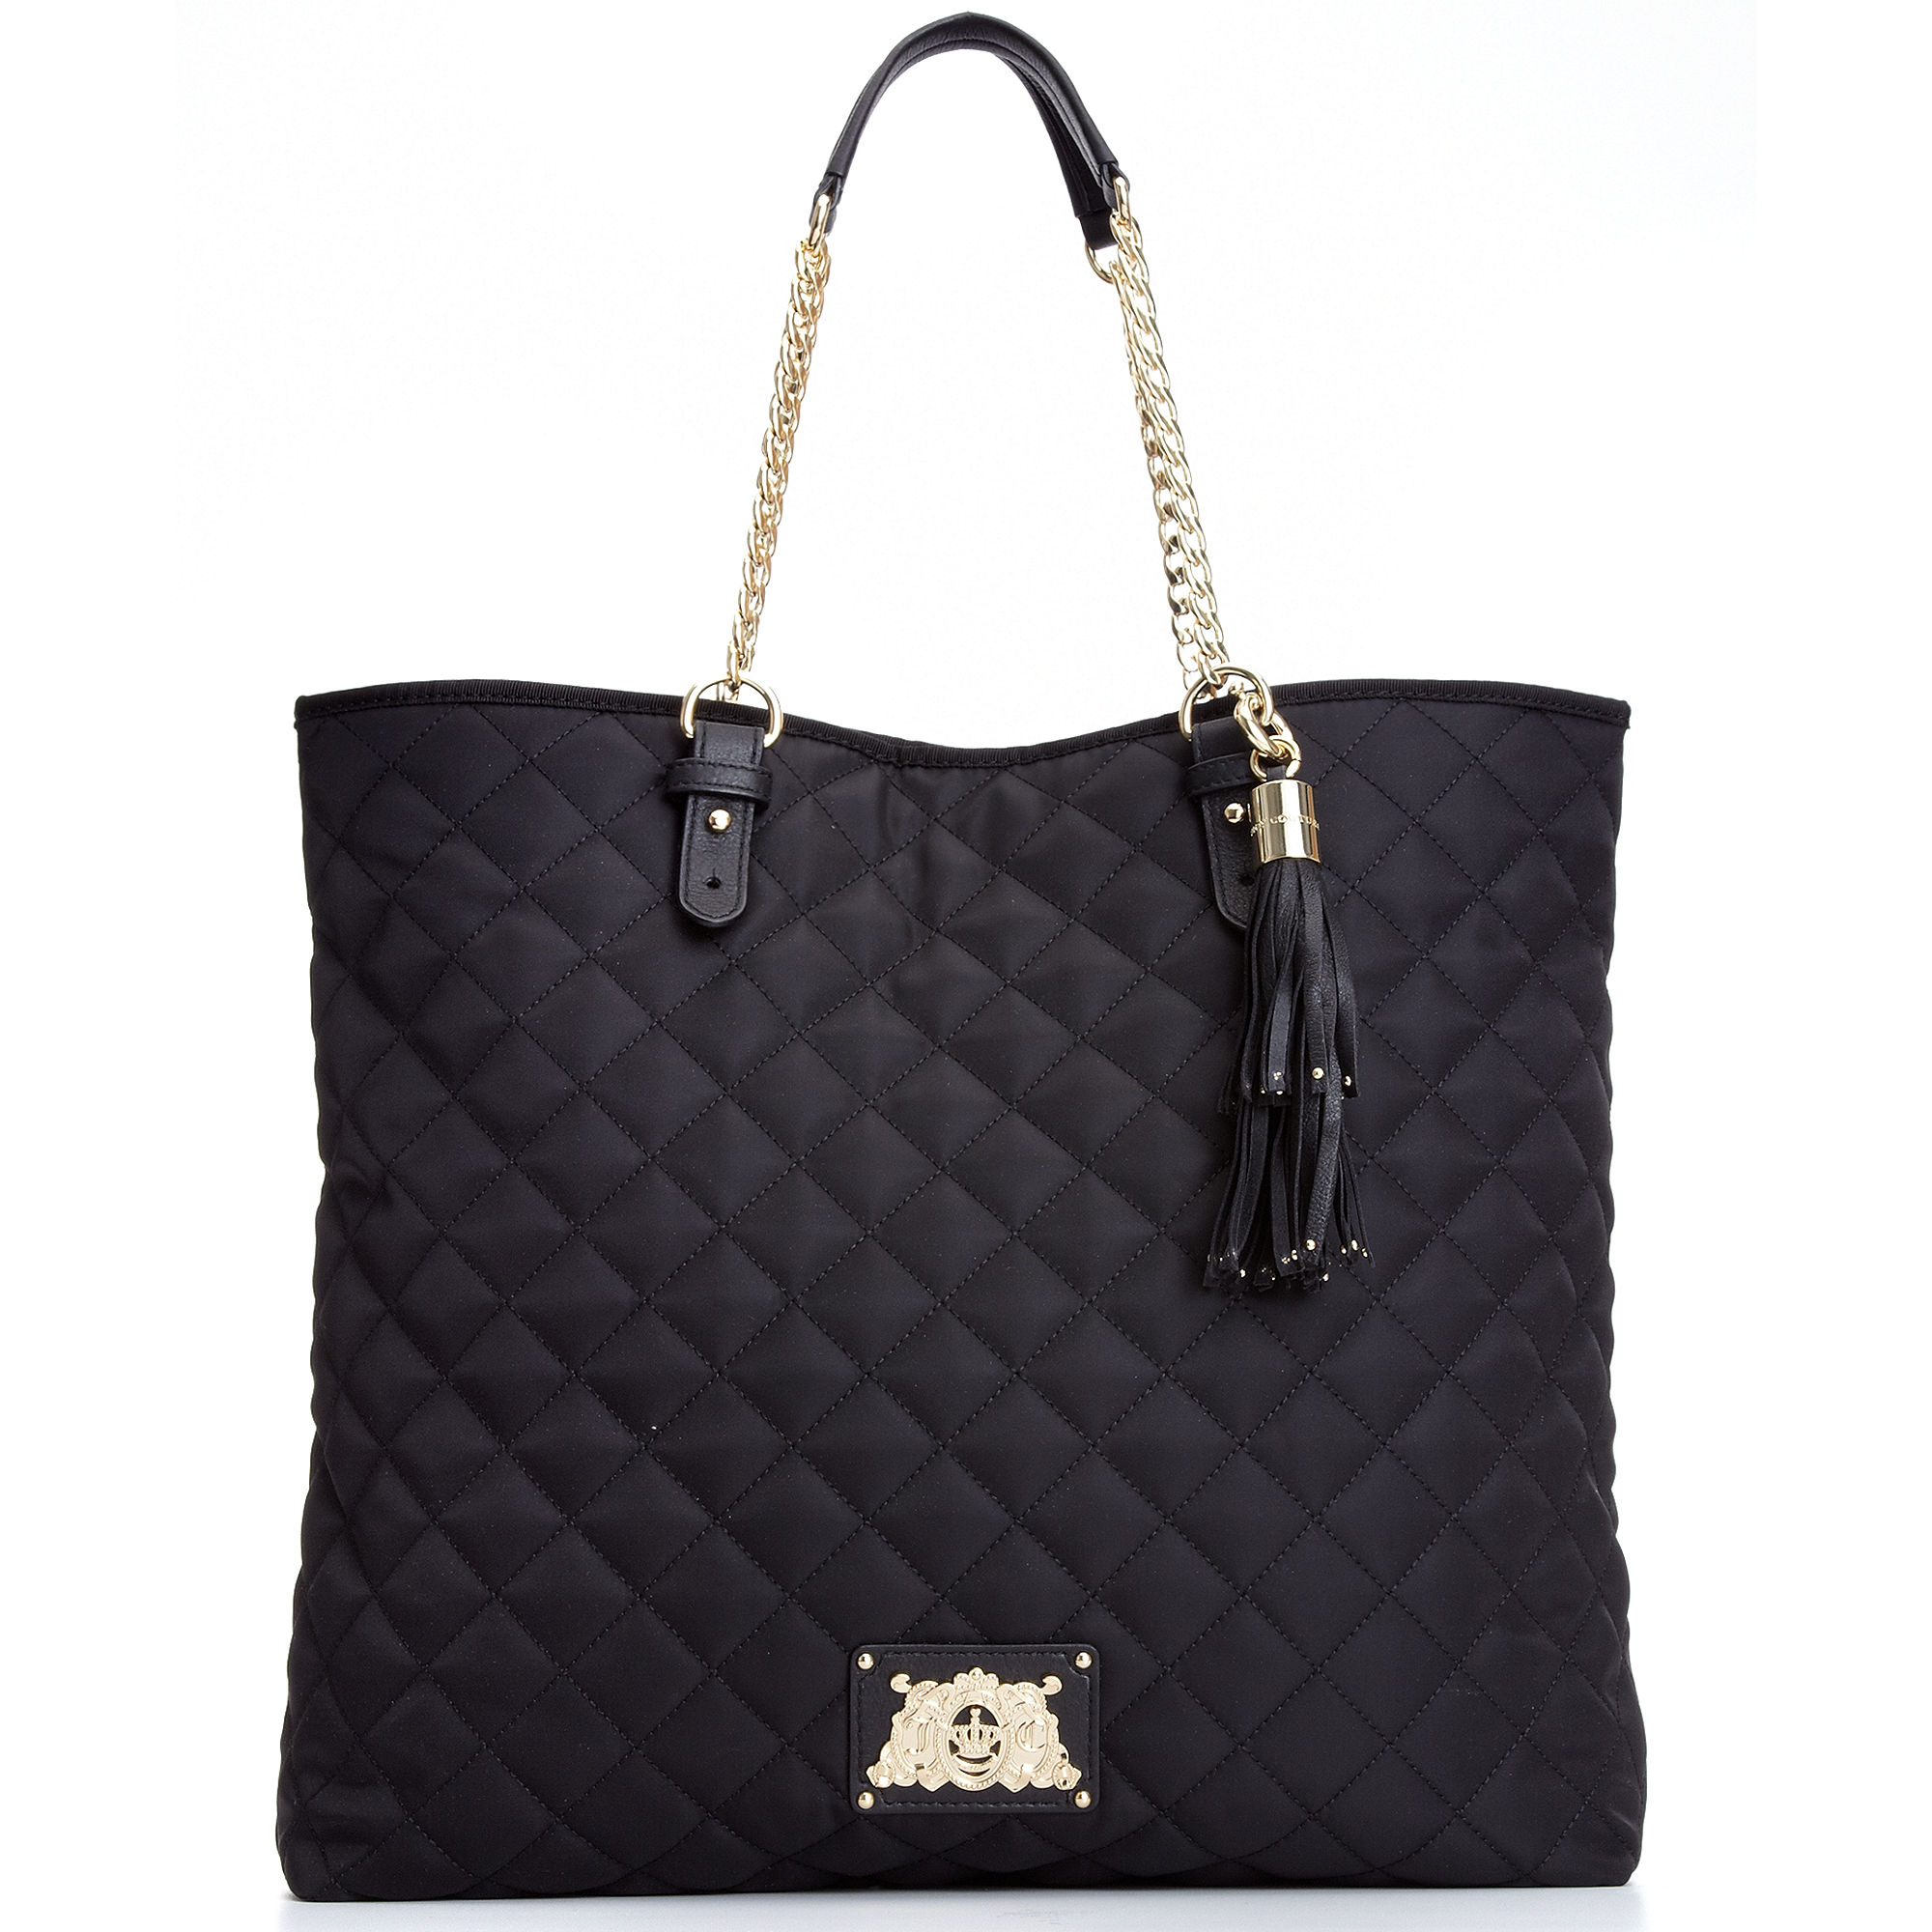 Juicy Couture Anja Nylon Tote in Black | Lyst